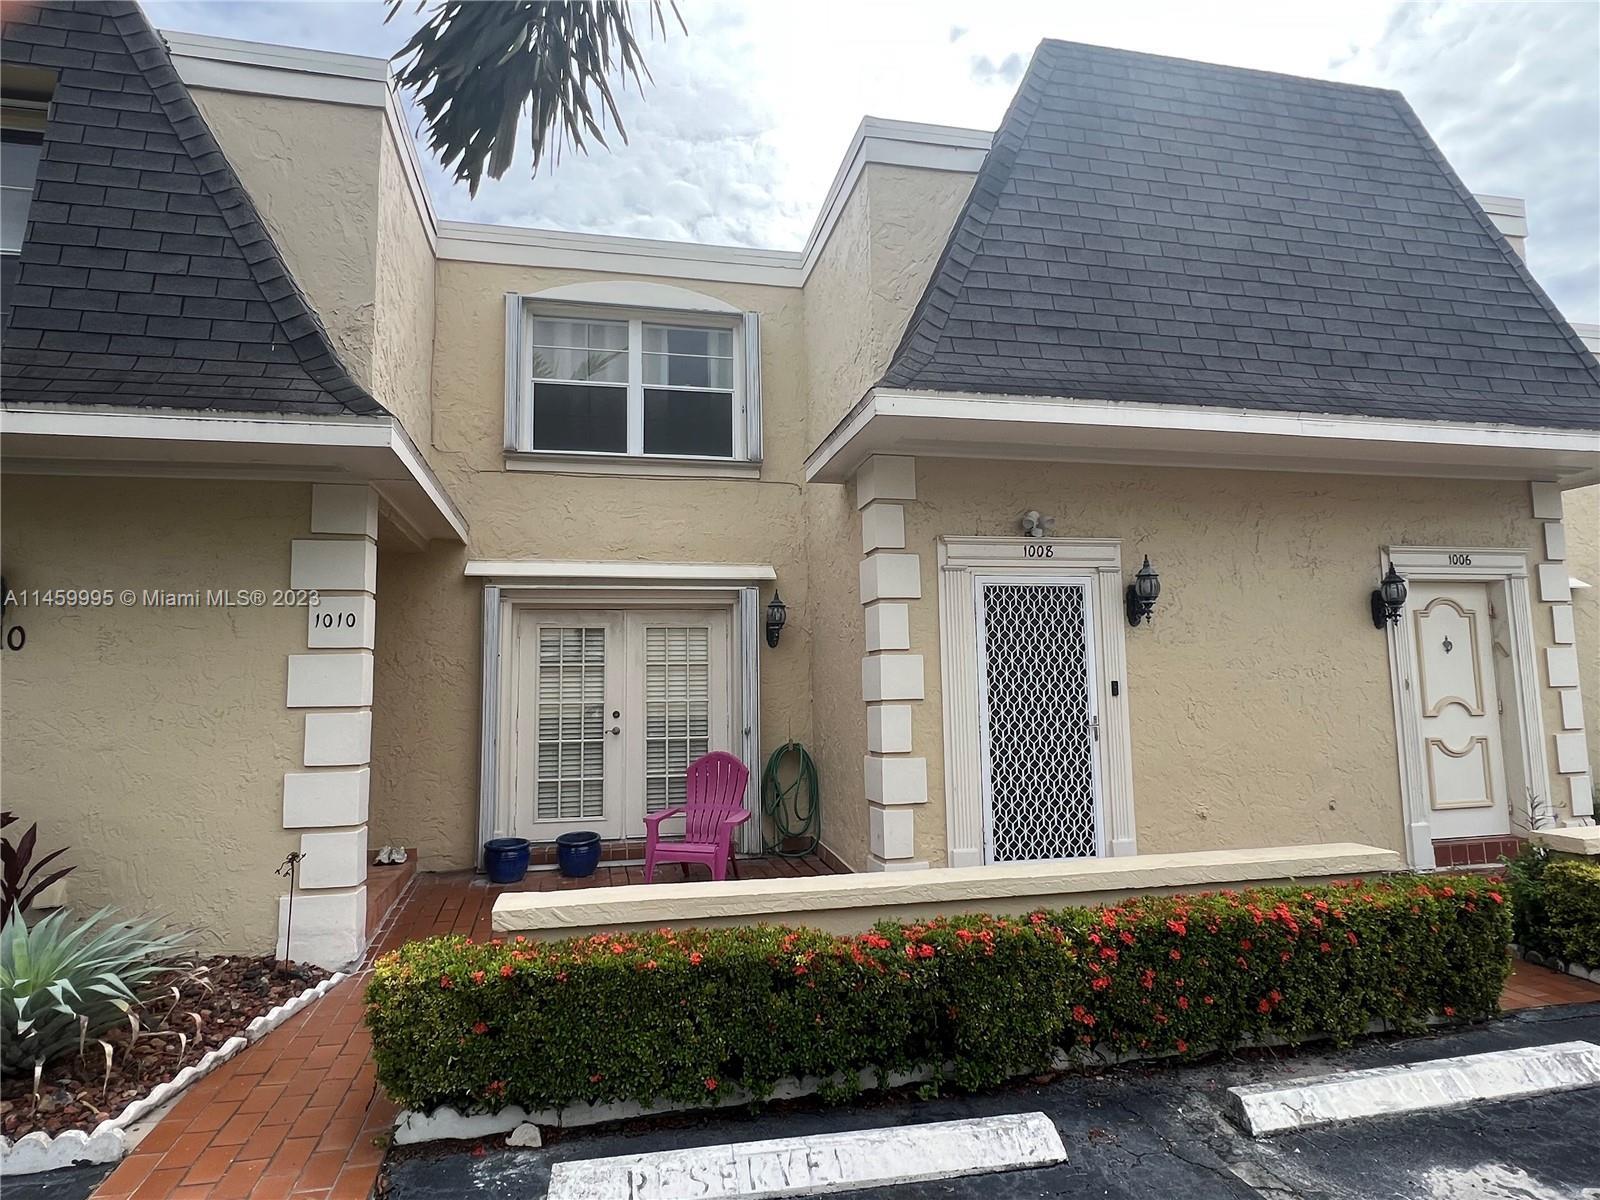 Cozy 2 story 2 bedrooms 2.5 baths Townhome, at Venetian Park in Three Islands. Spacious living room 